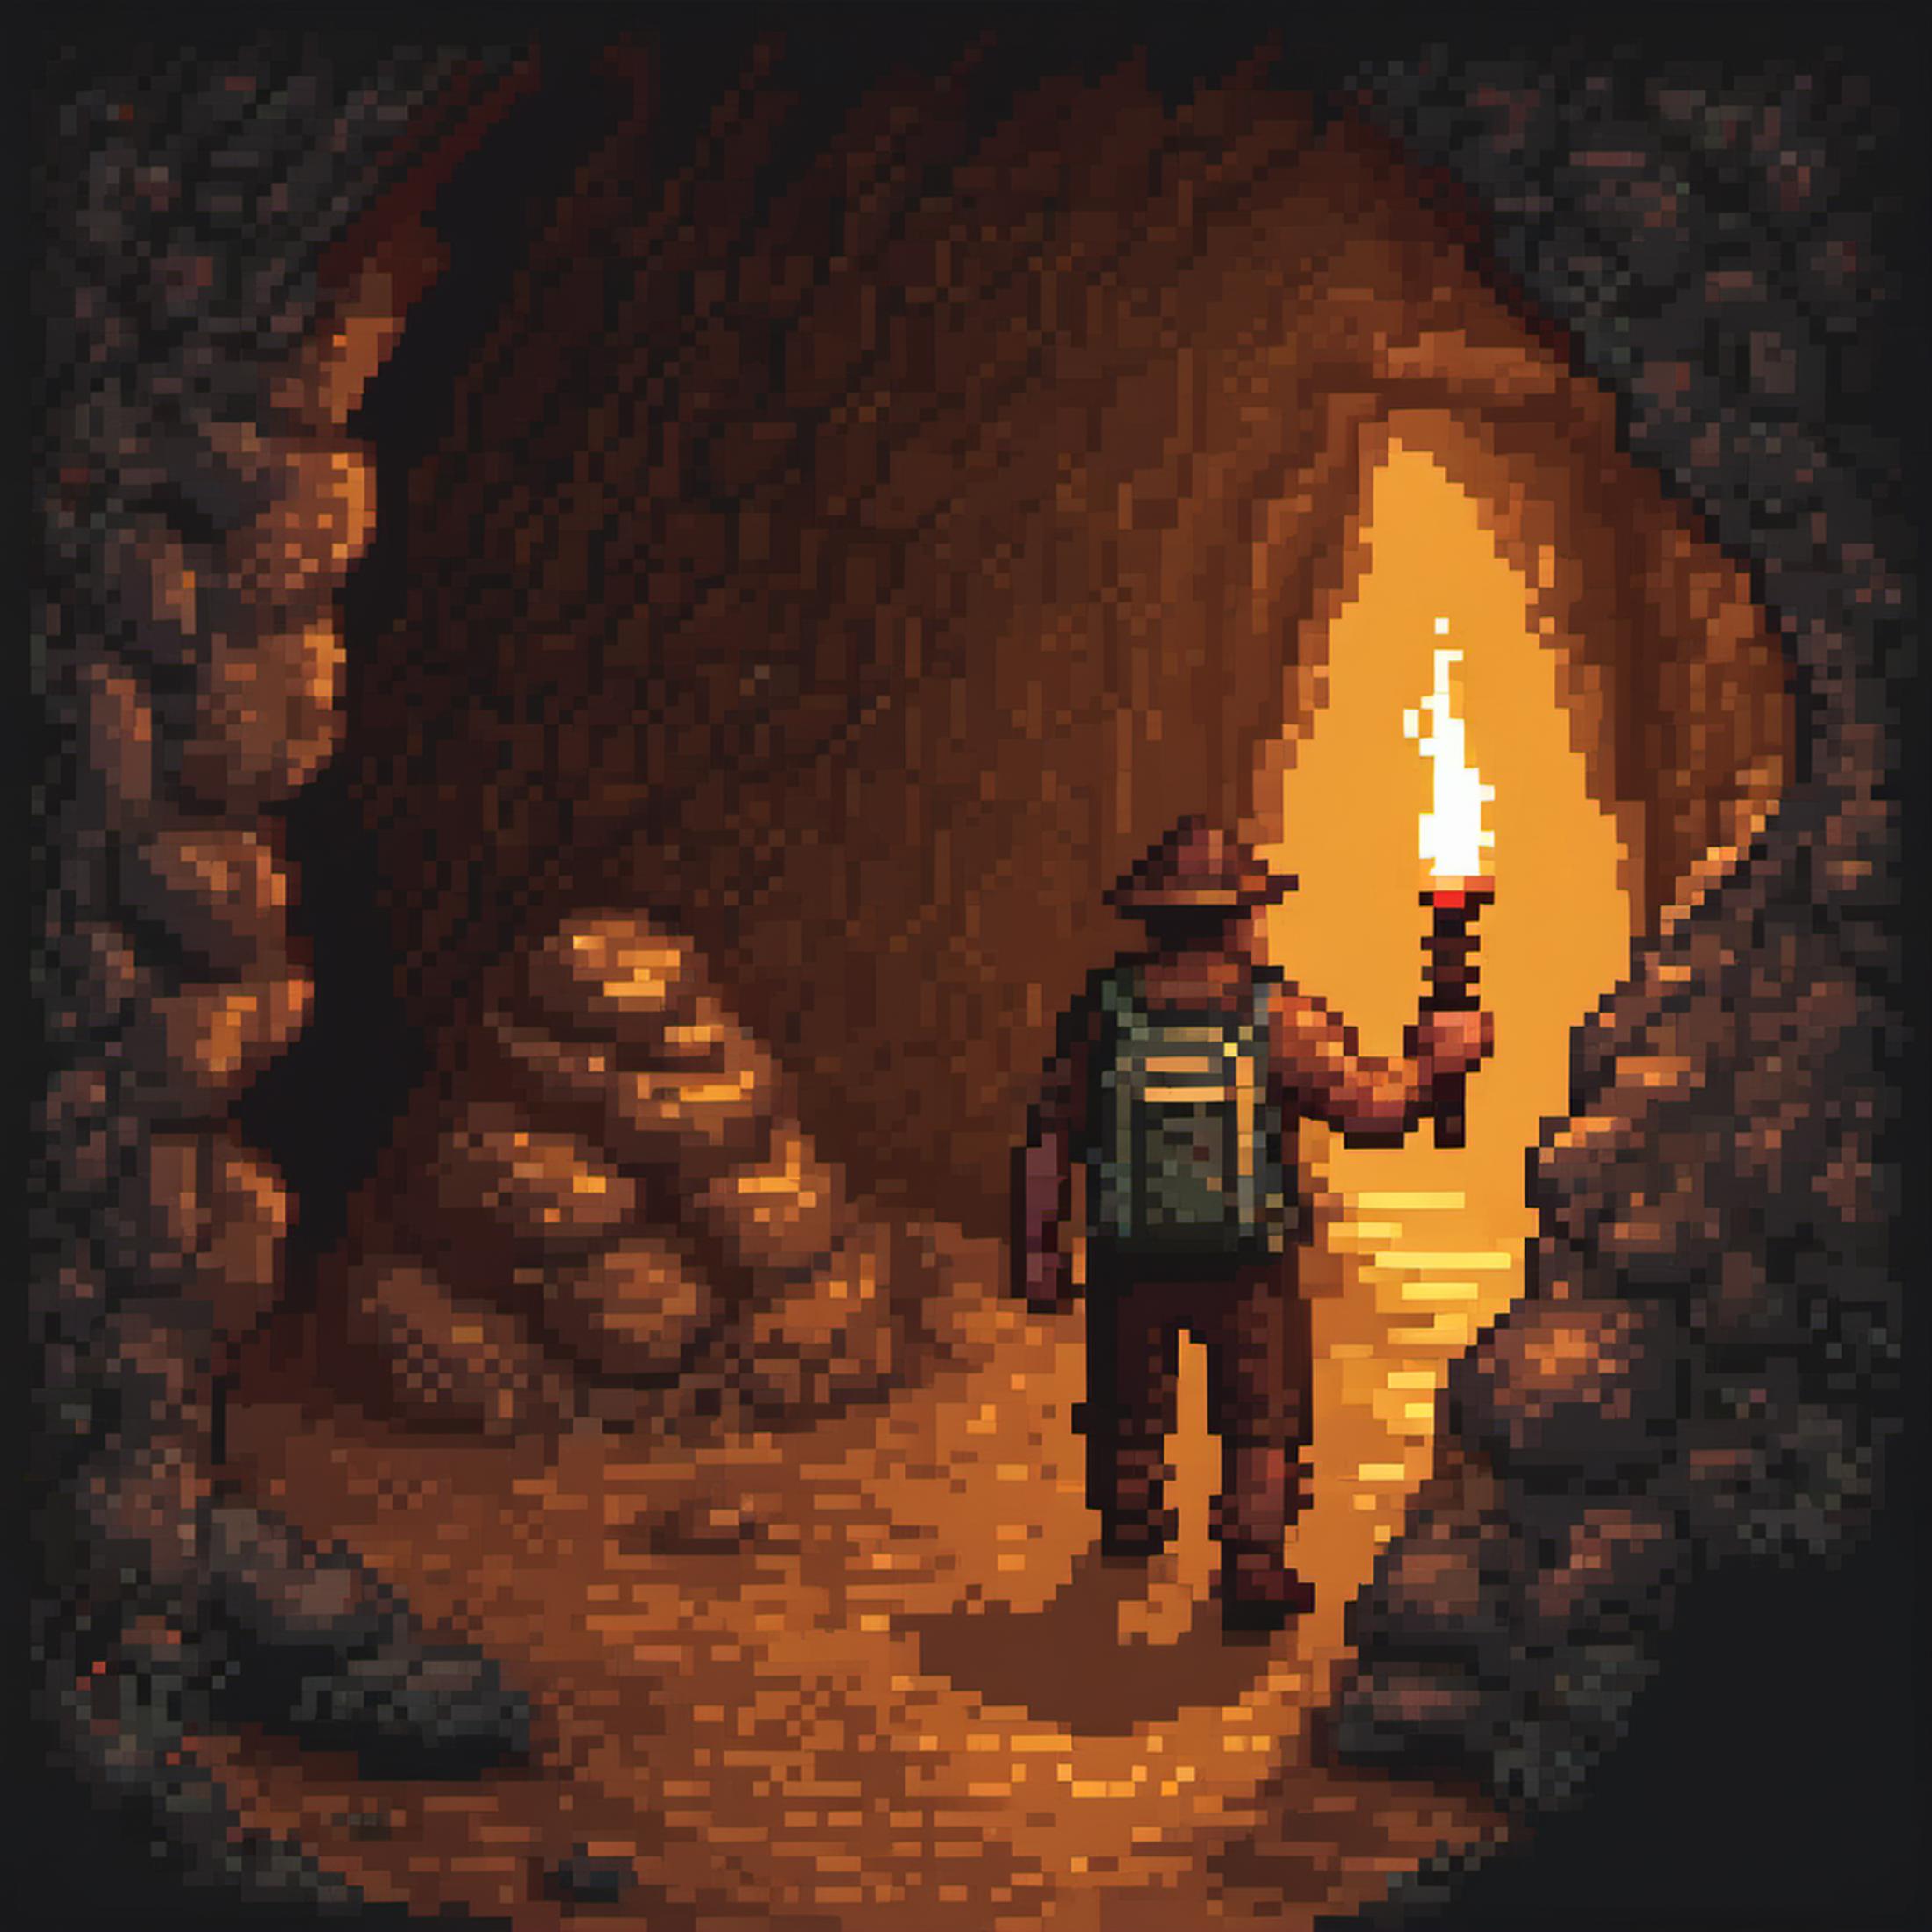 A man in a hat is holding a light and walking through a cave.